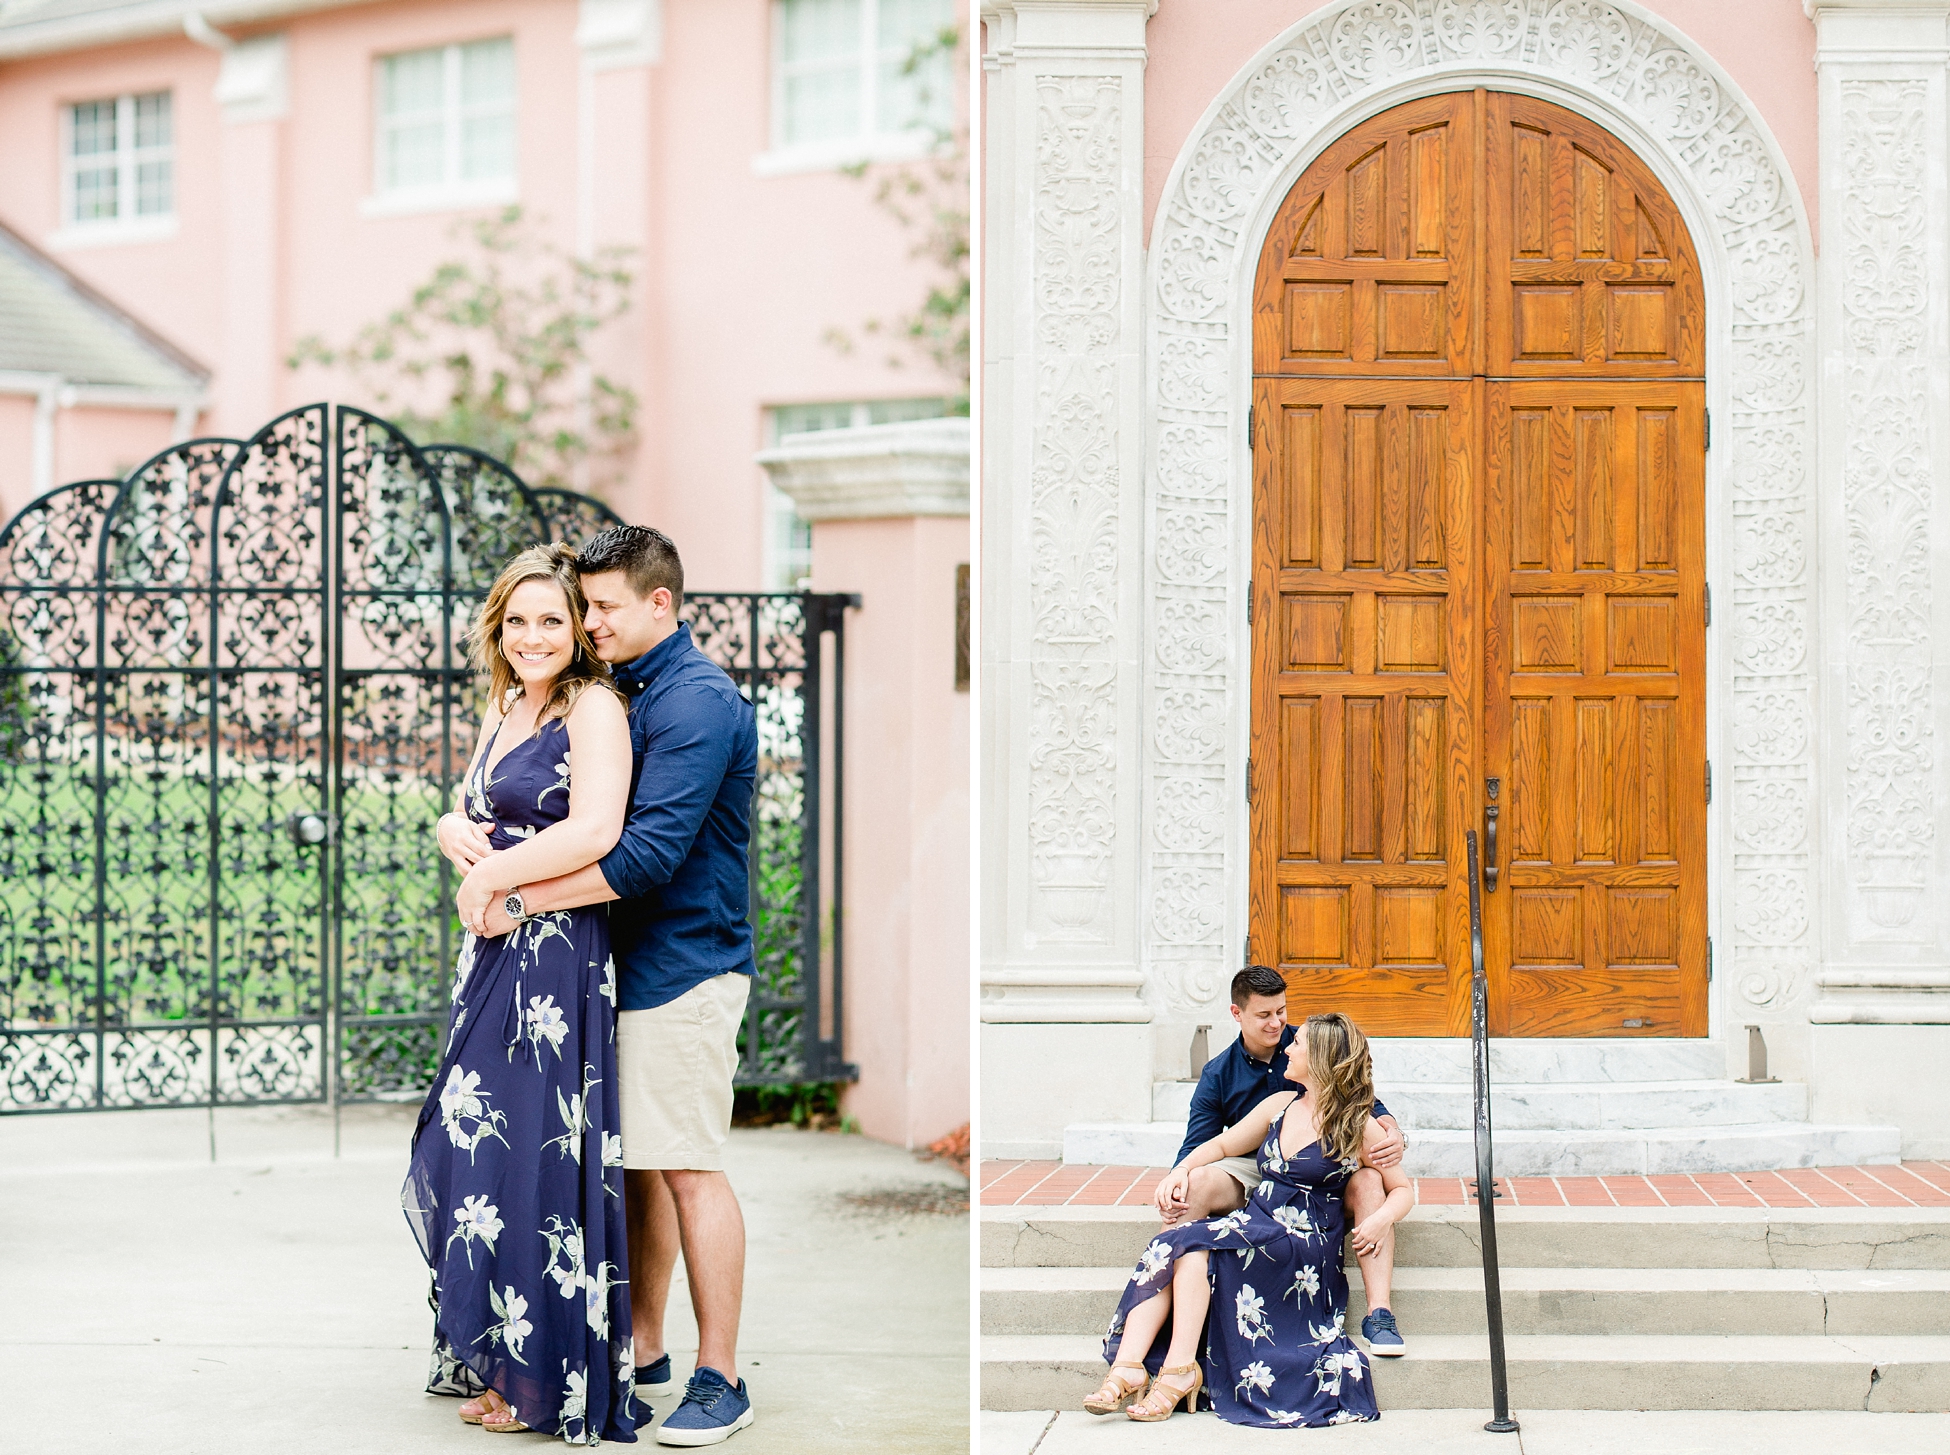 Clearwater Engagement | © Ailyn La Torre Photography 2018